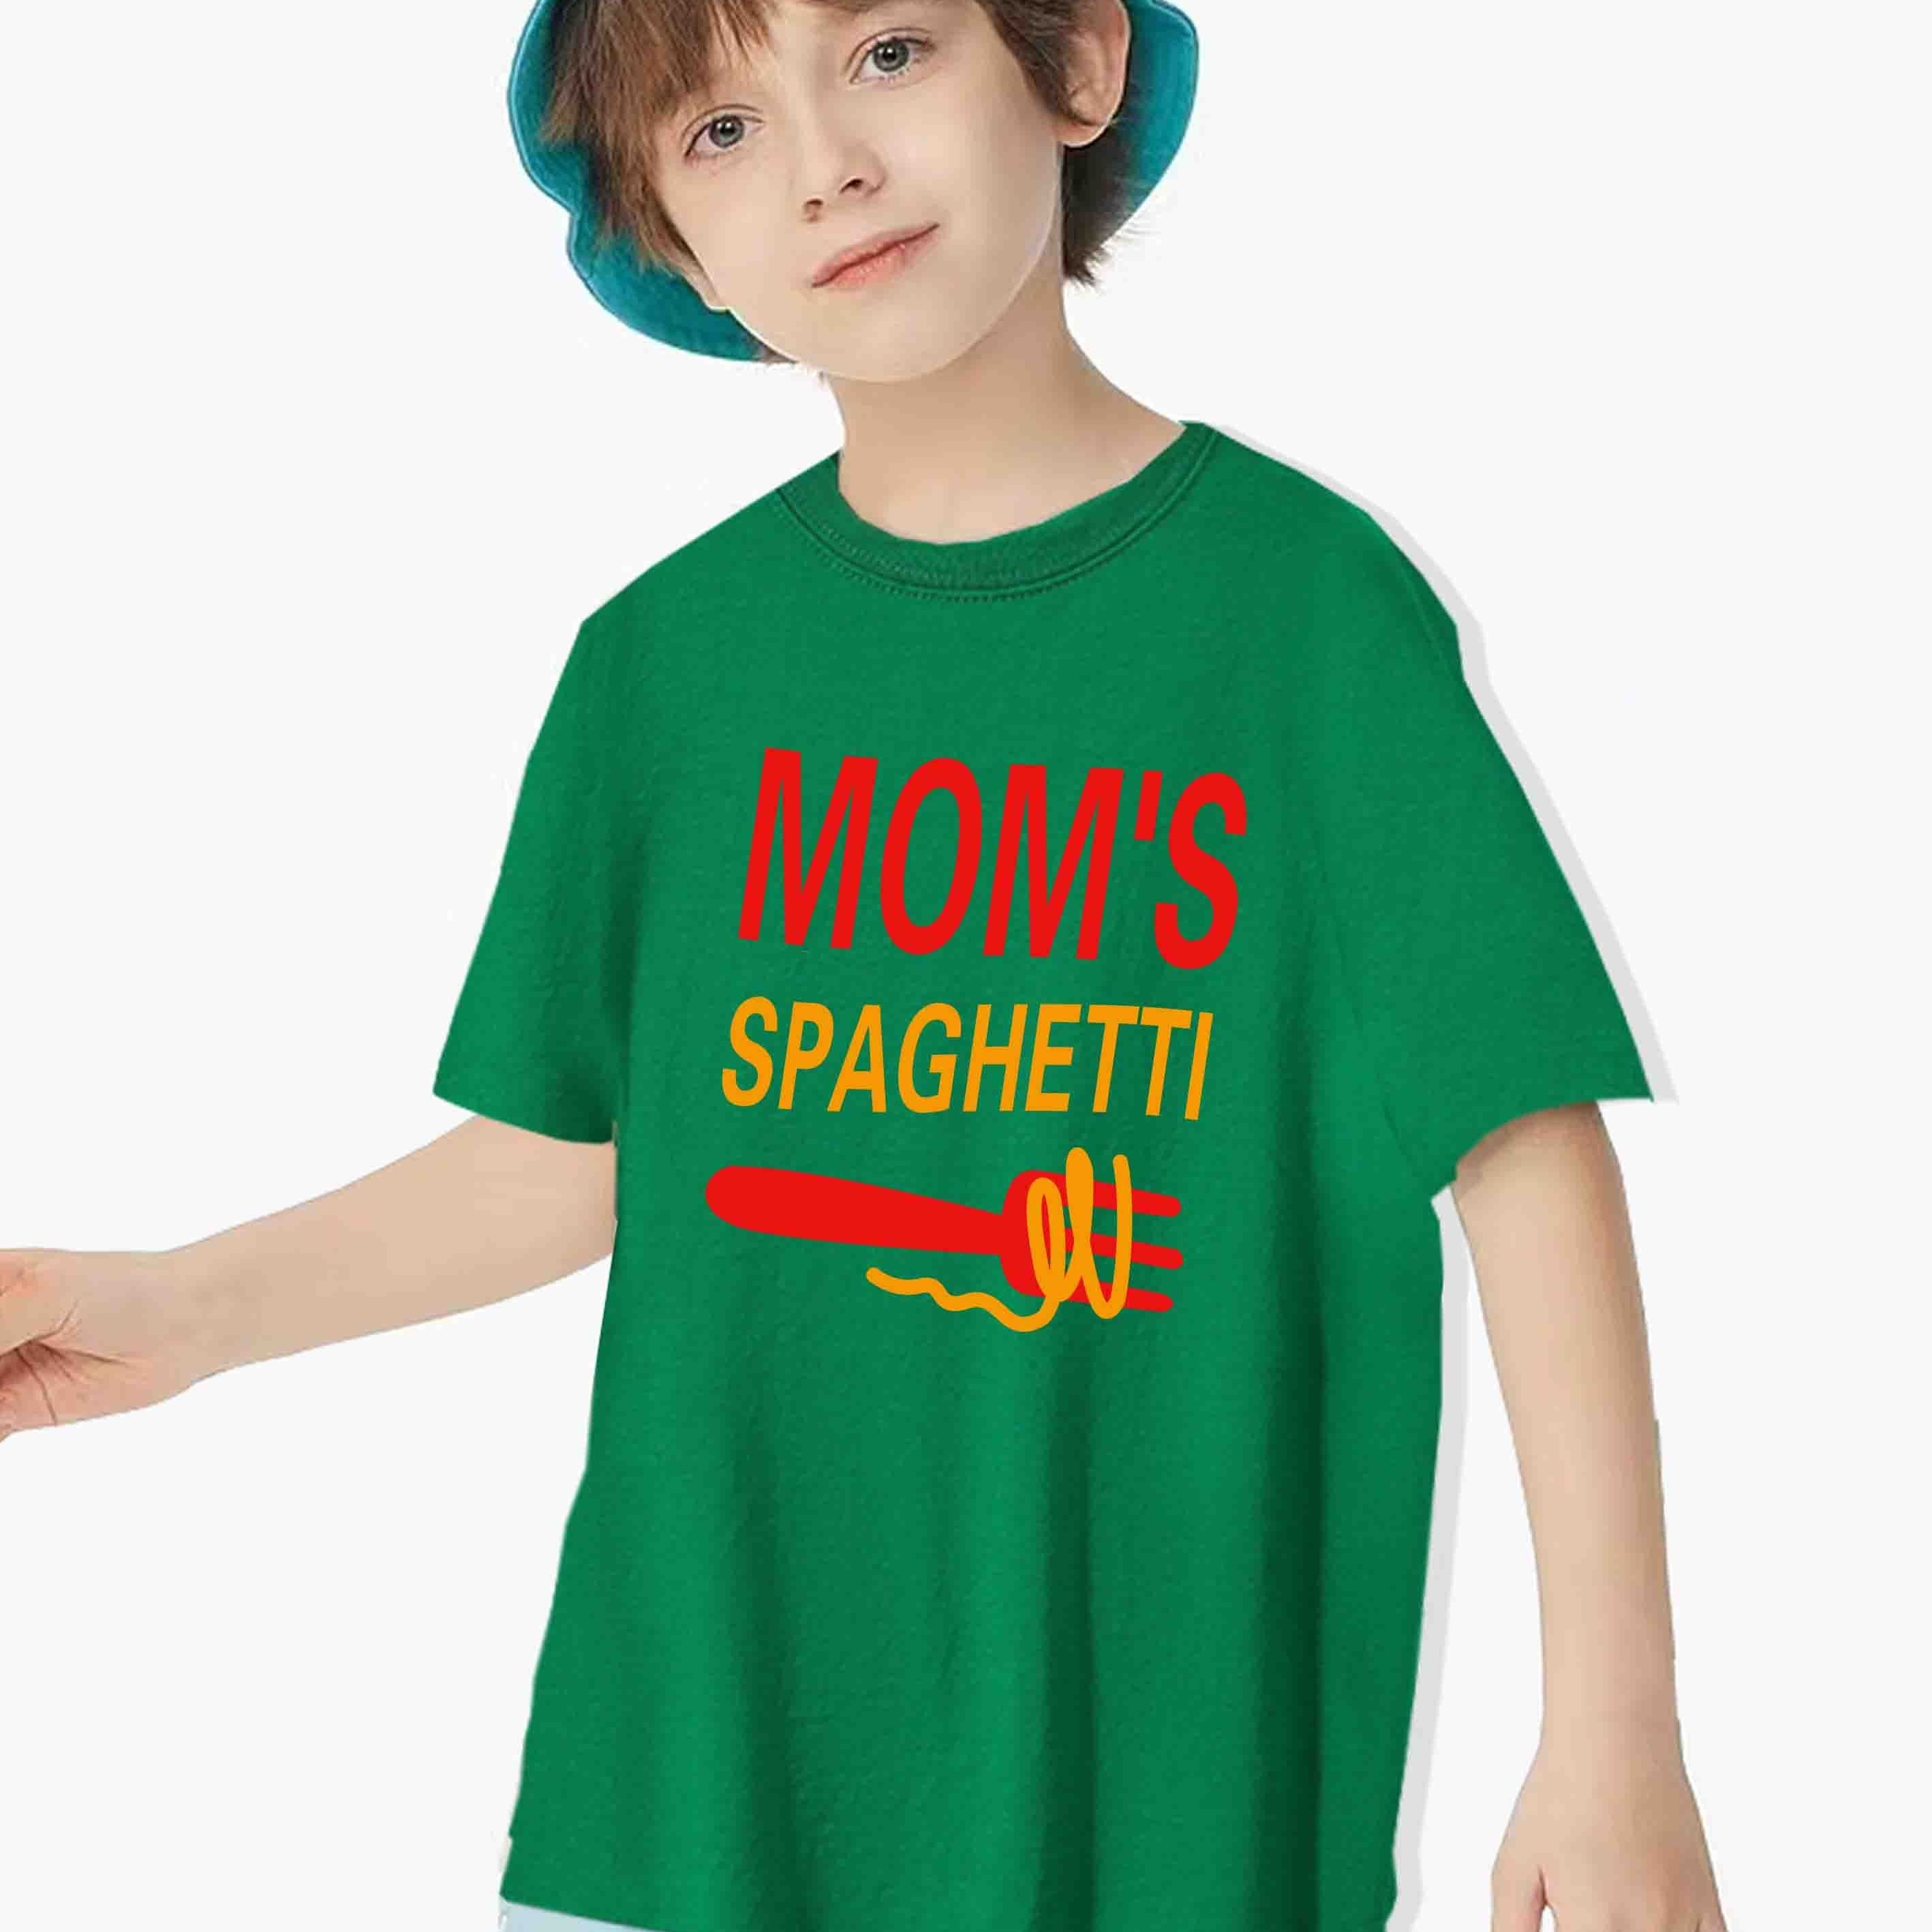 

Mom's Spaghetti Print, Boy's Fashion Comfy Cotton Blend T-shirt, Casual Stretchy Breathable Short Sleeve Top For Summer